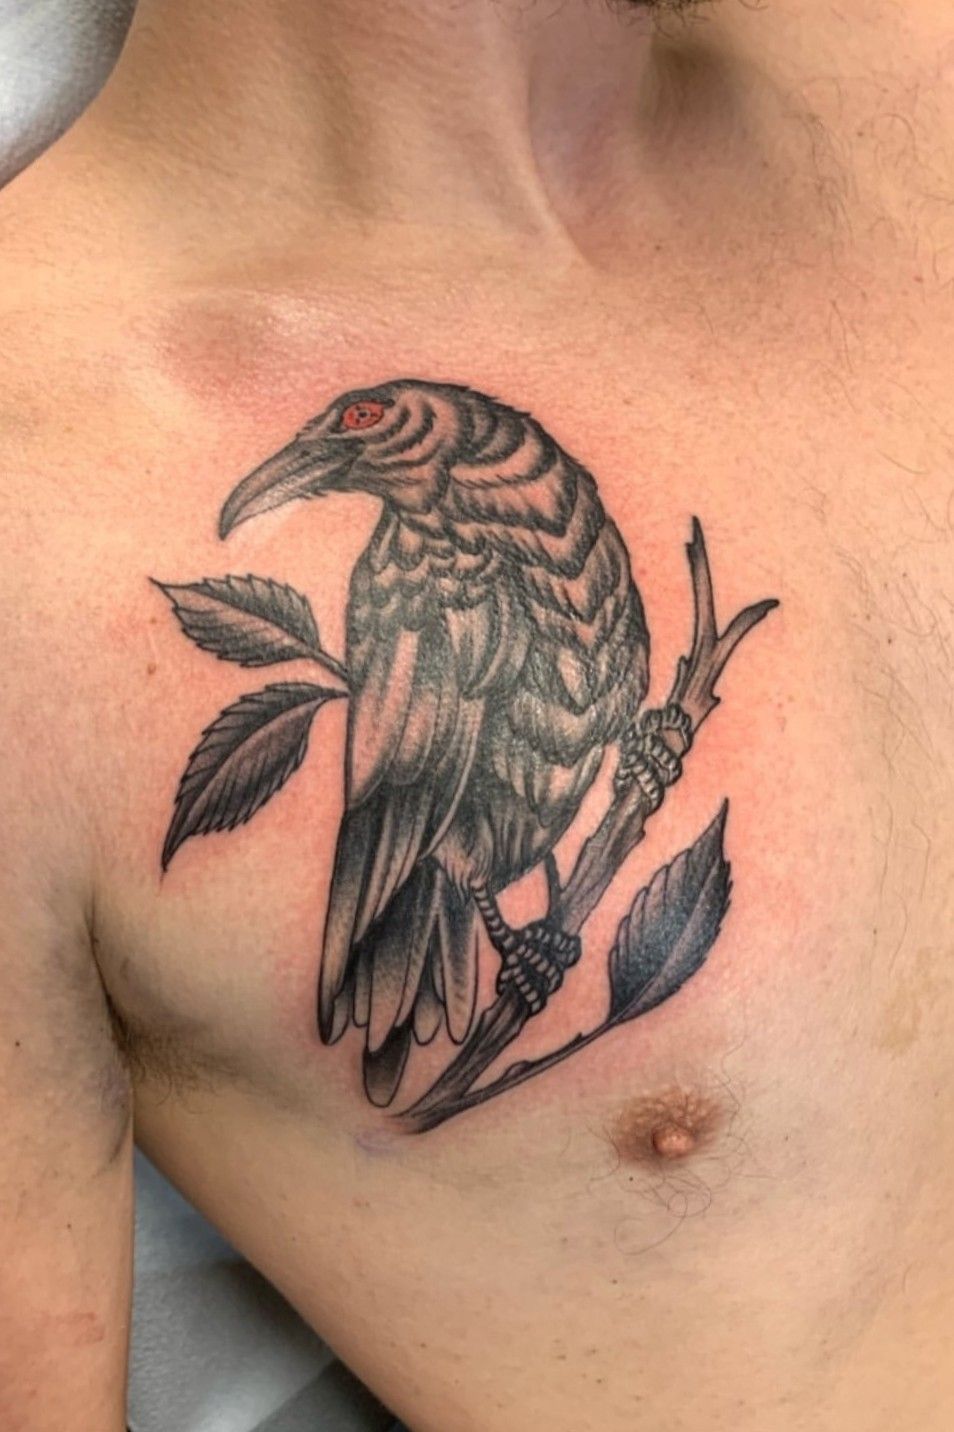 101 Best Itachi Crows Tattoo Ideas That Will Blow Your Mind! - Outsons